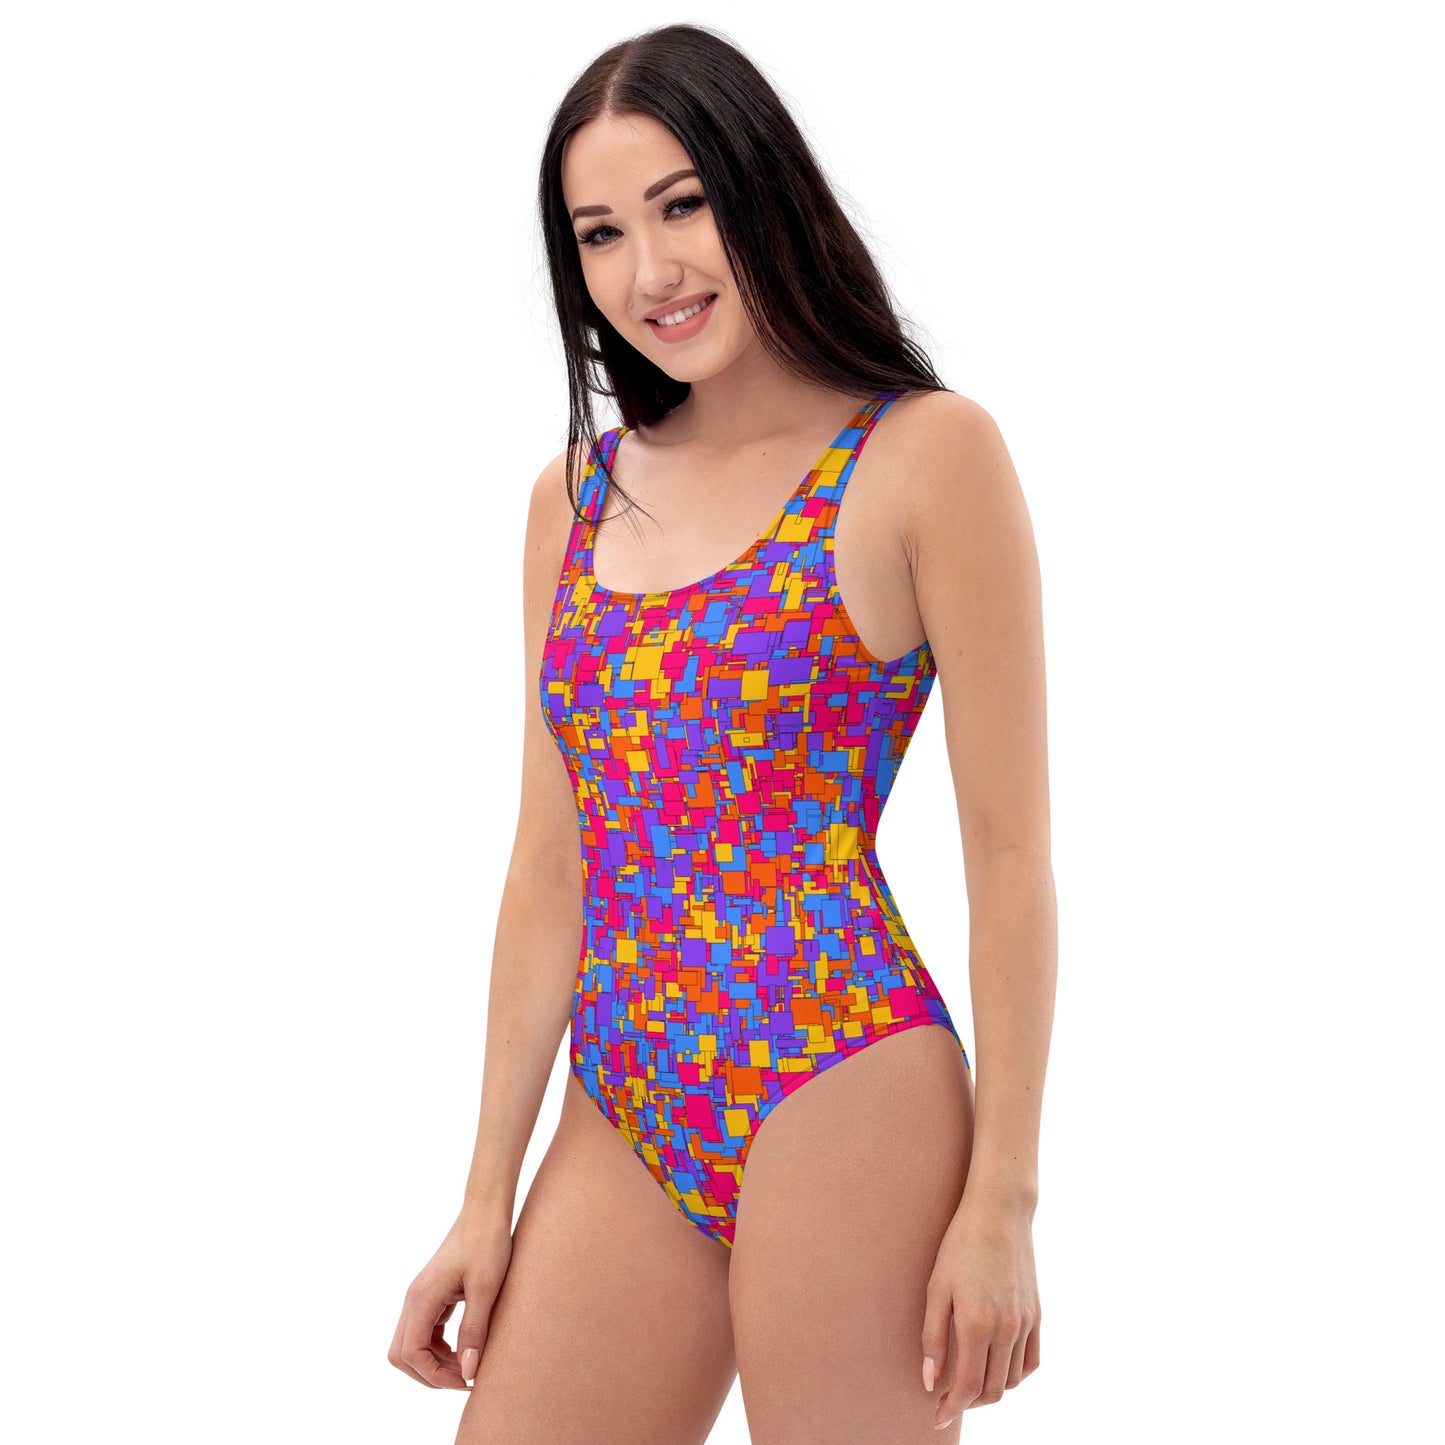 Get Ready to Turn Heads: Our Vibrant One-Piece Swimsuit with Bold Geometric Shapes